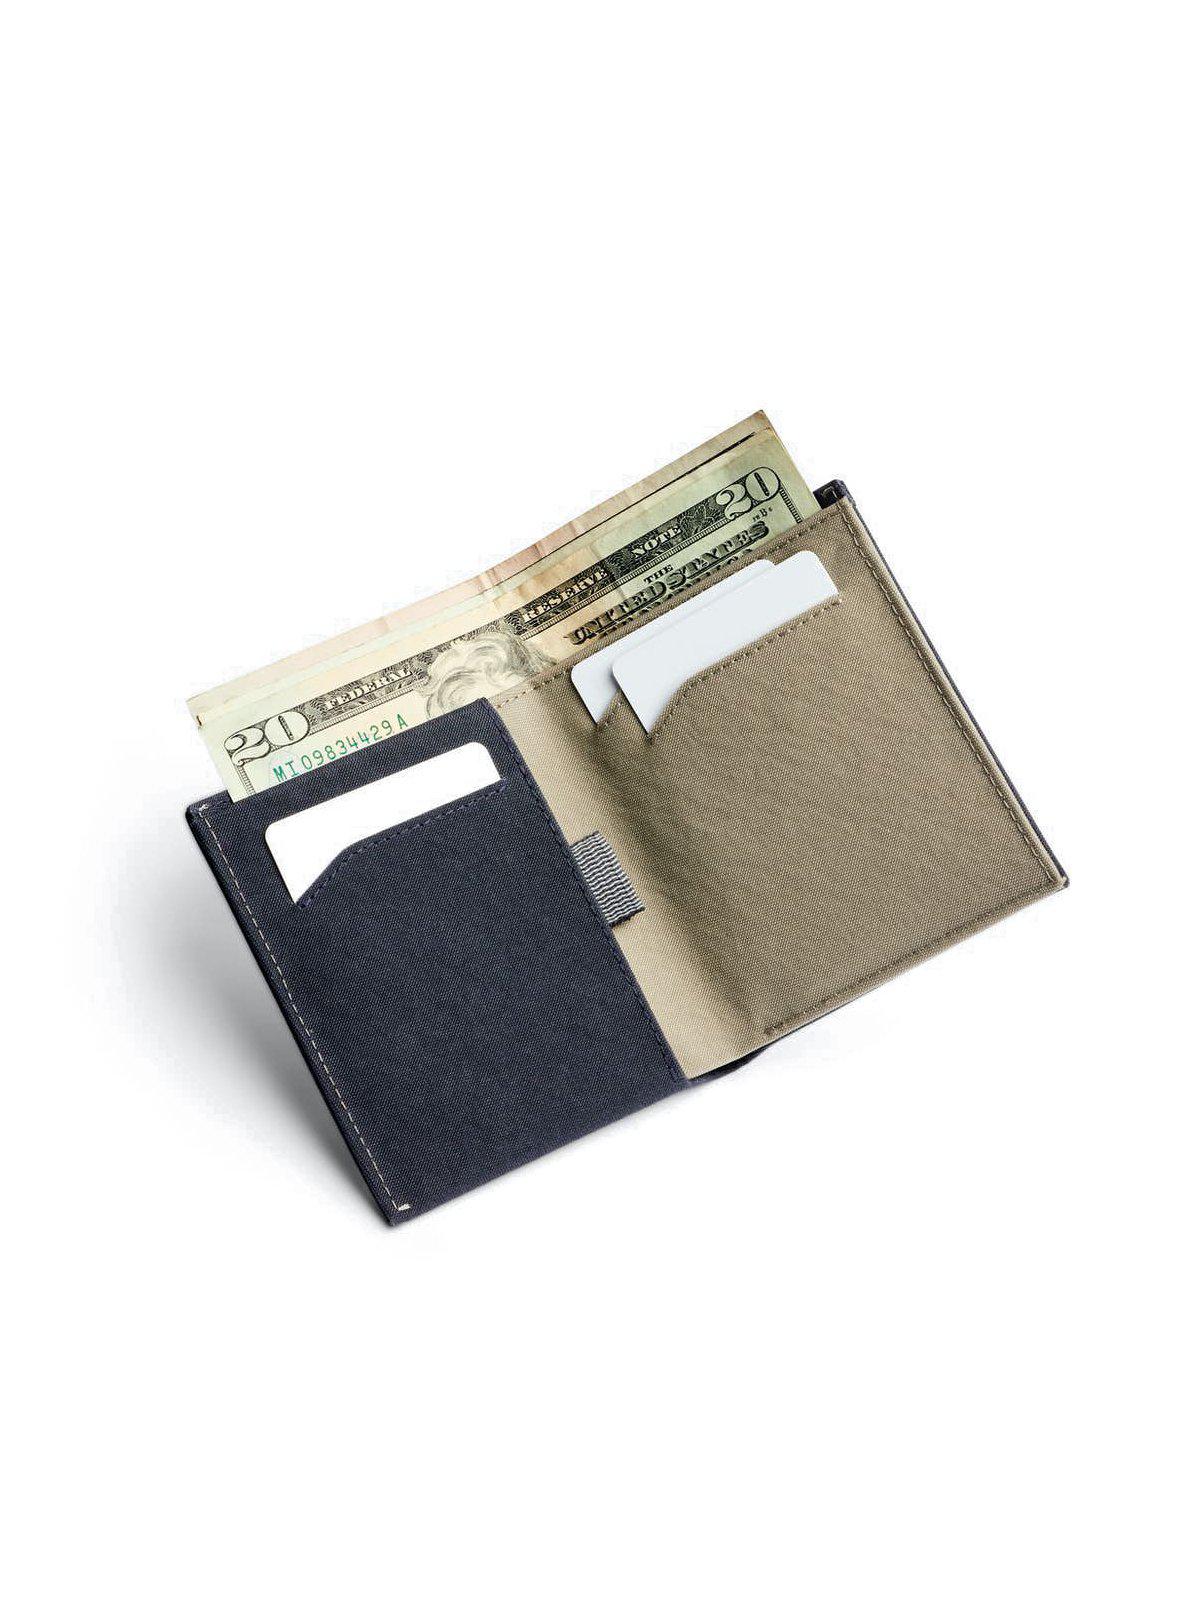 Bellroy Note Sleeve Wallet Woven Charcoal RFID (Leather-Free)